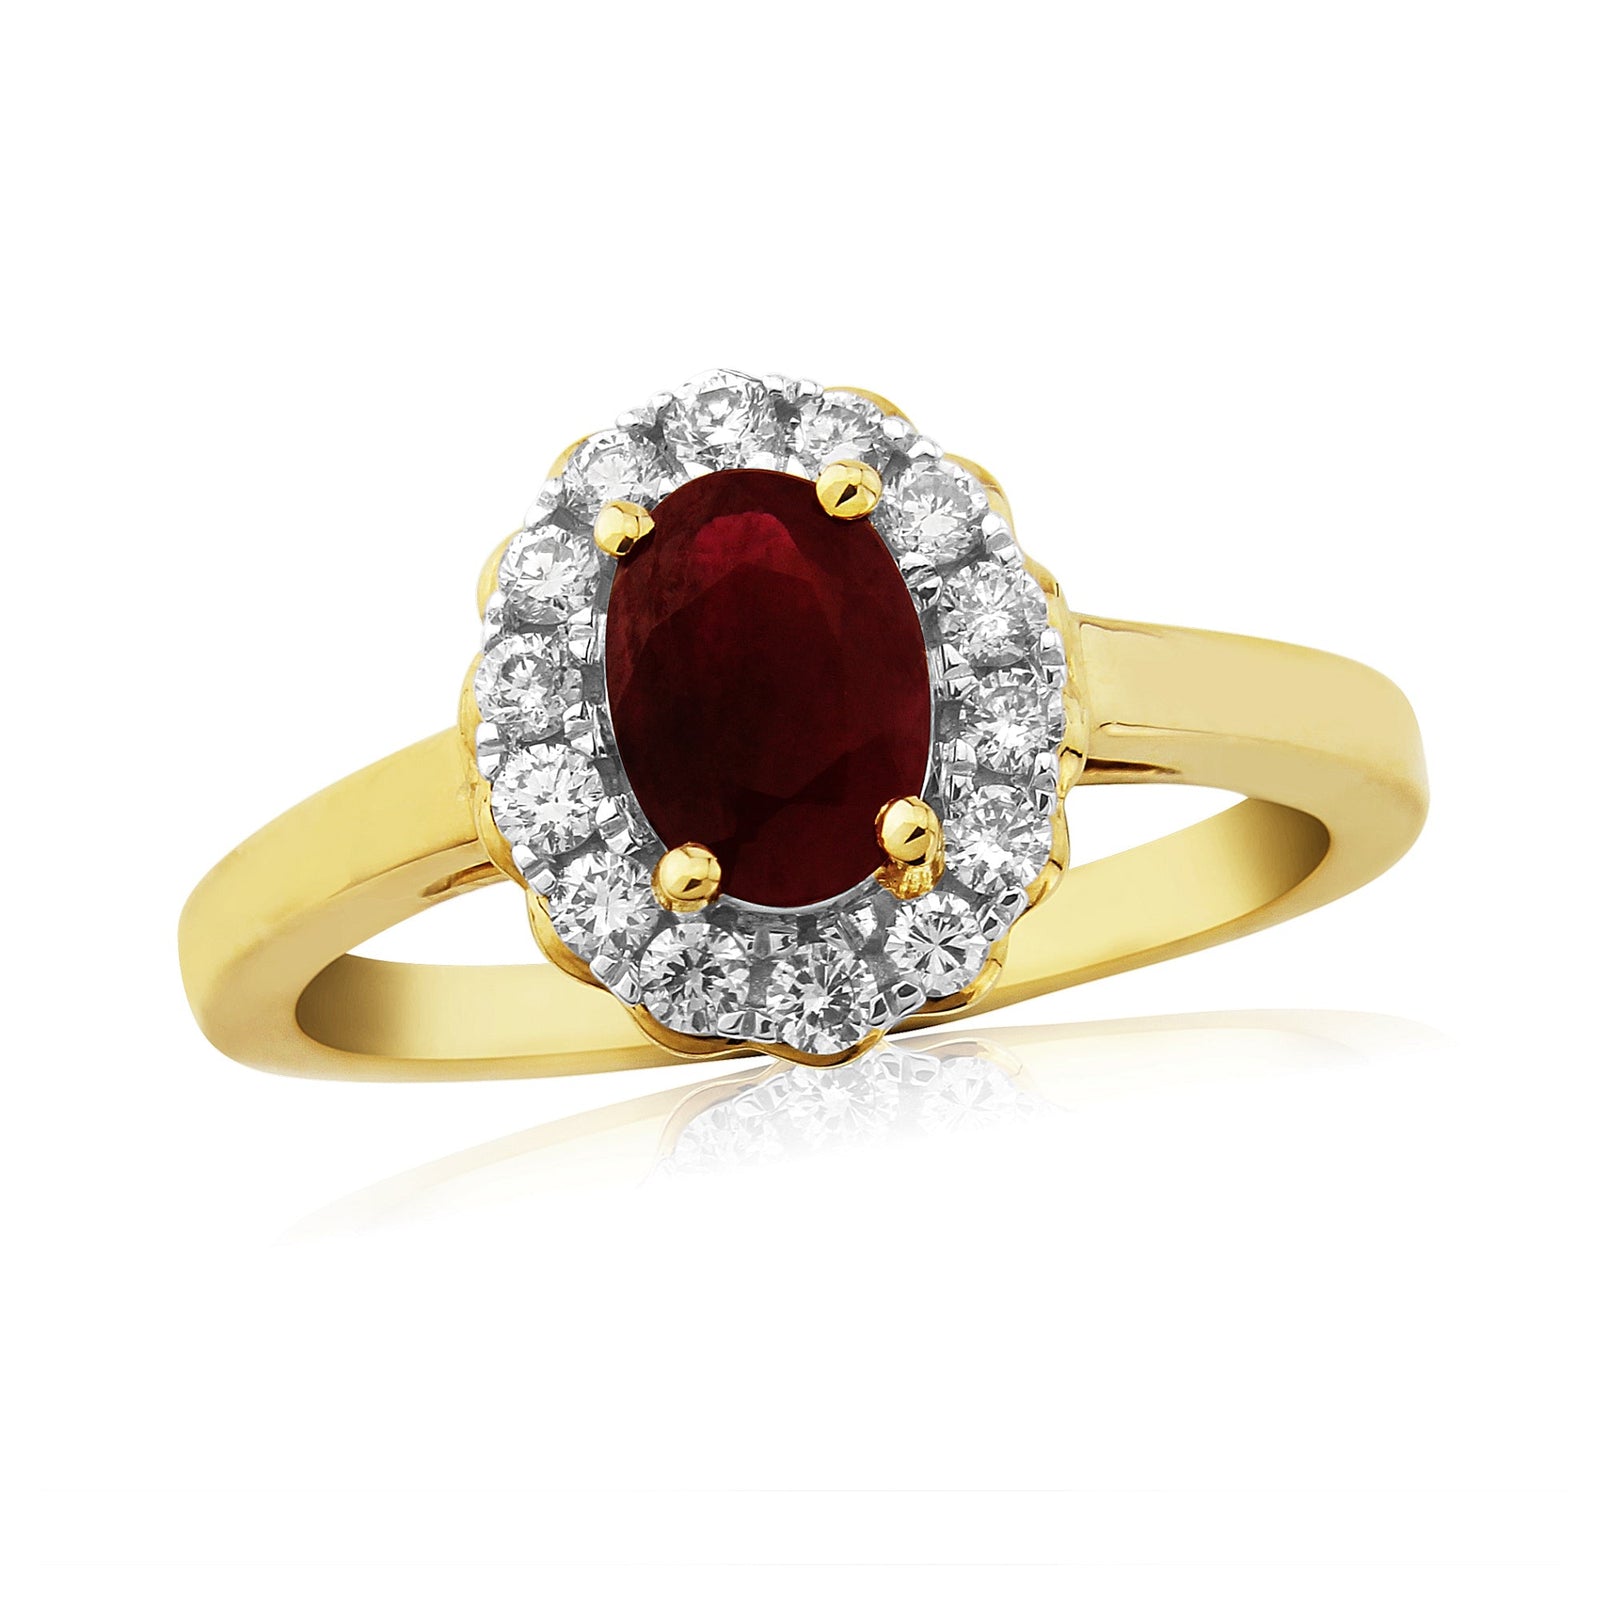 9ct gold 7x5mm oval ruby & diamond cluster ring 0.21ct